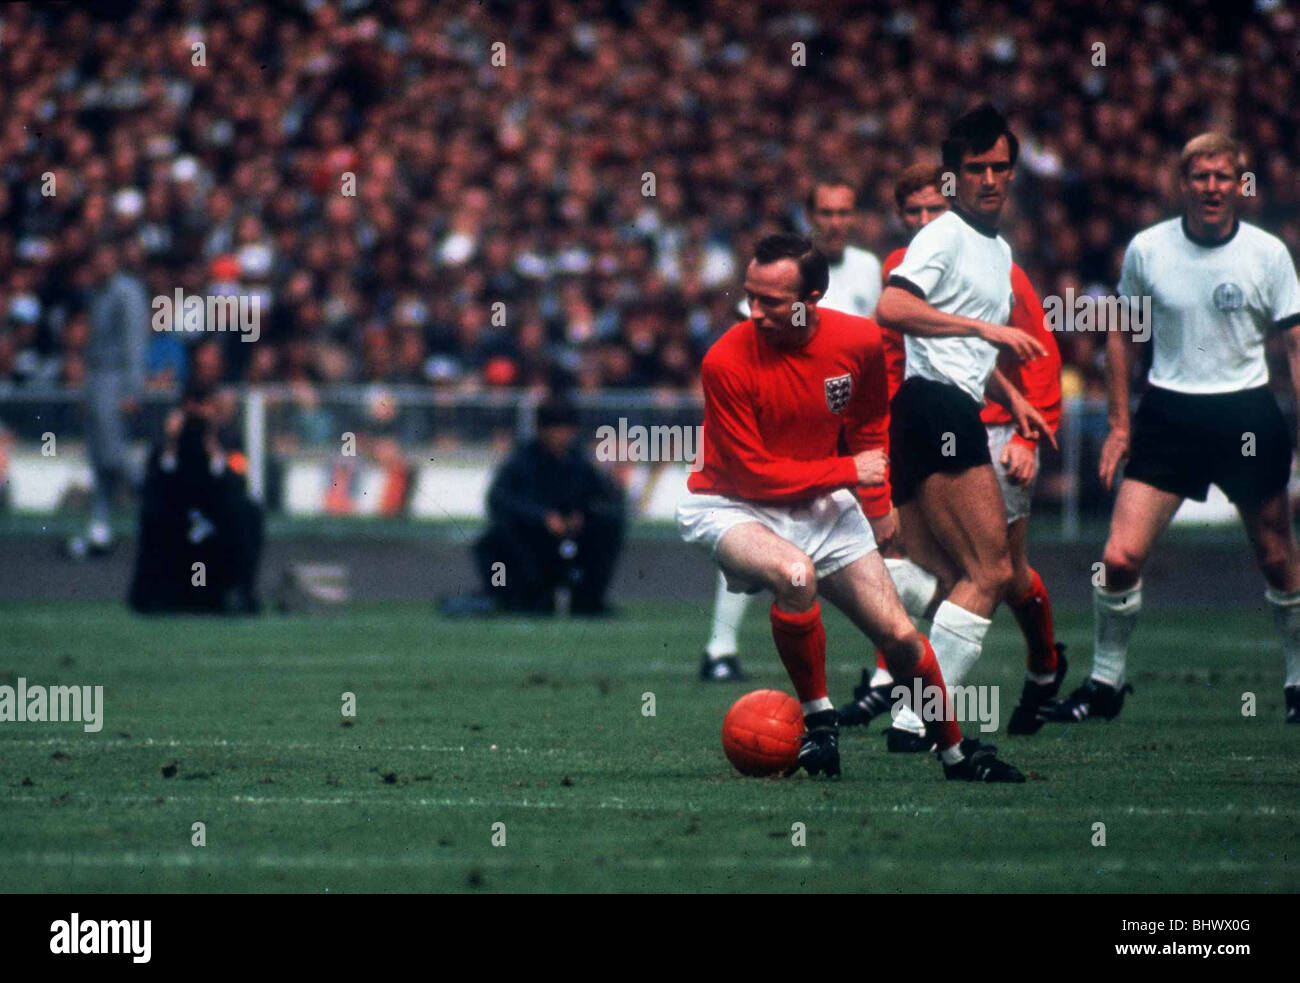 Welt-Cup-Finale Fußball 1966 England 4 West Germany 2 bei Wembley Nobby Stiles mit ball Stockfoto